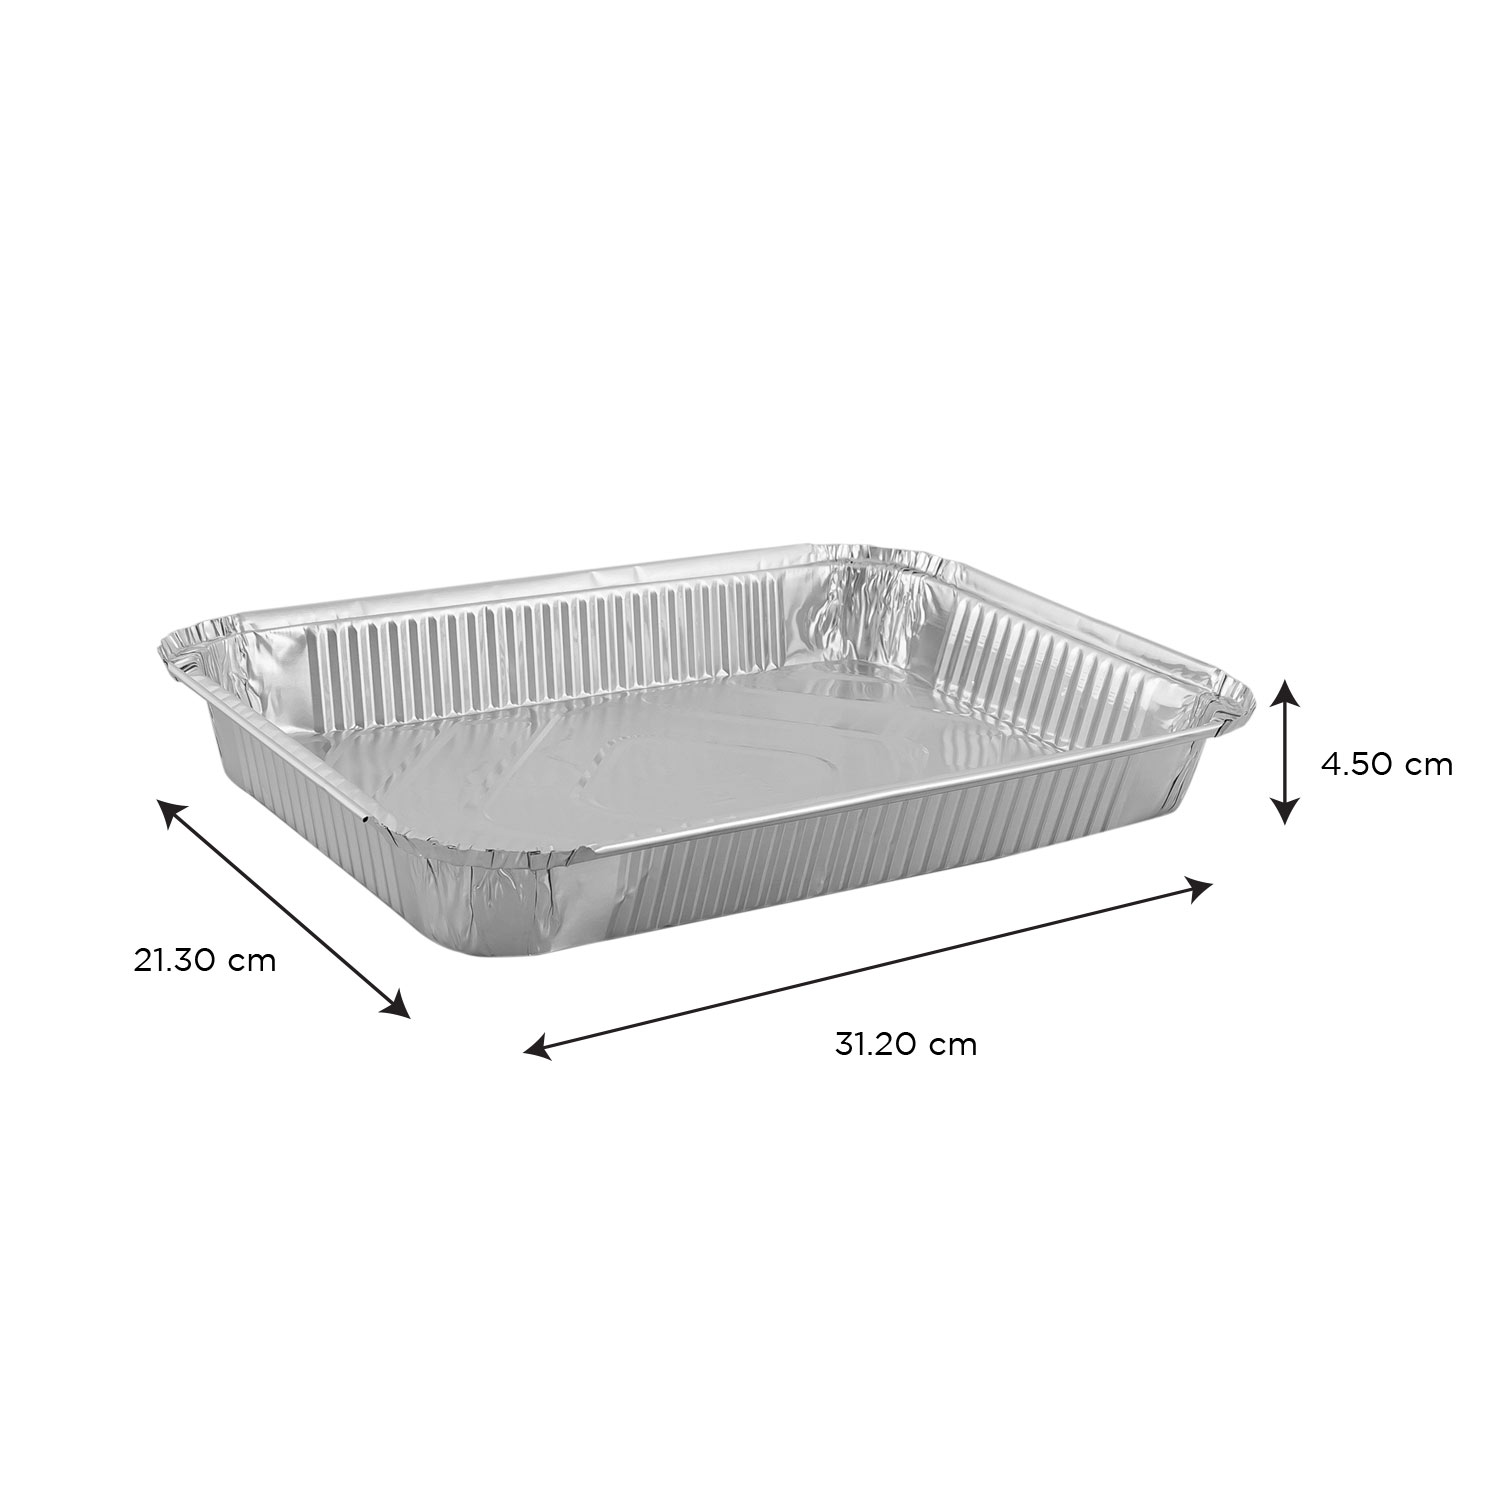 4 lb. Oblong Take-Out Foil Container 